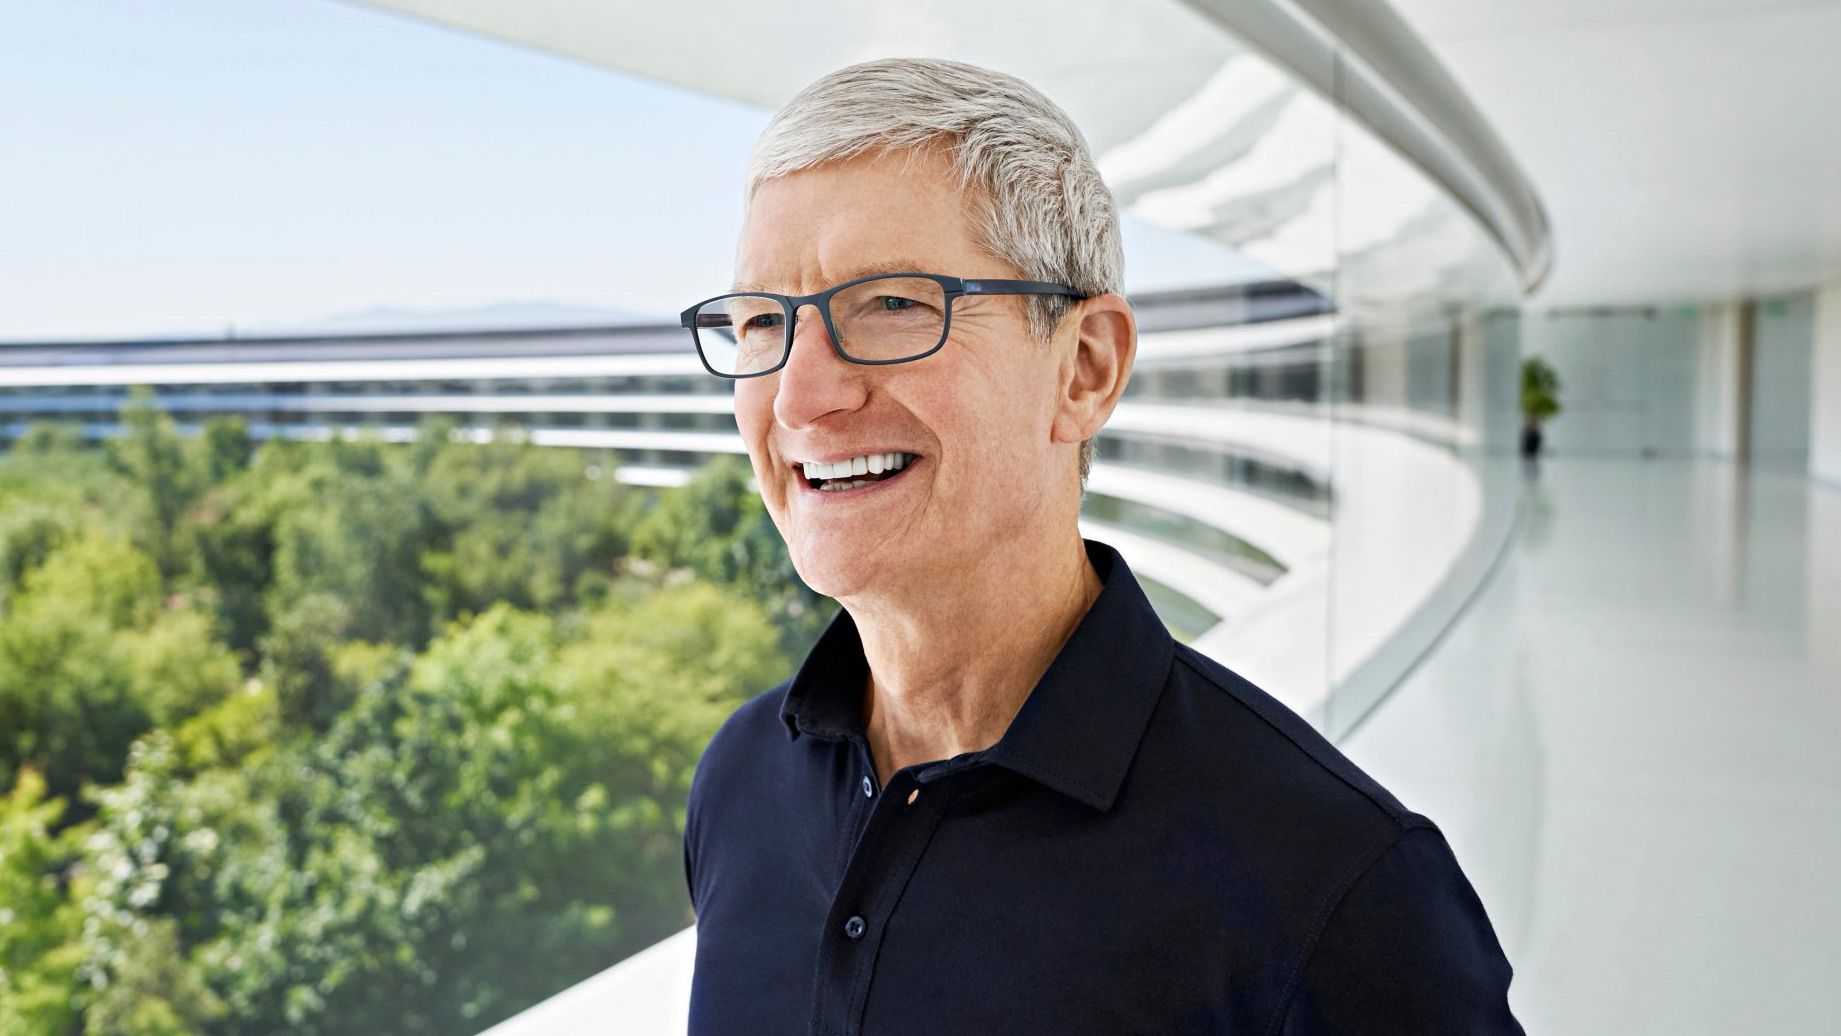 Apple CEO Tim Cook Says Technology Can Change the World for Better in Open  Letter - MacRumors